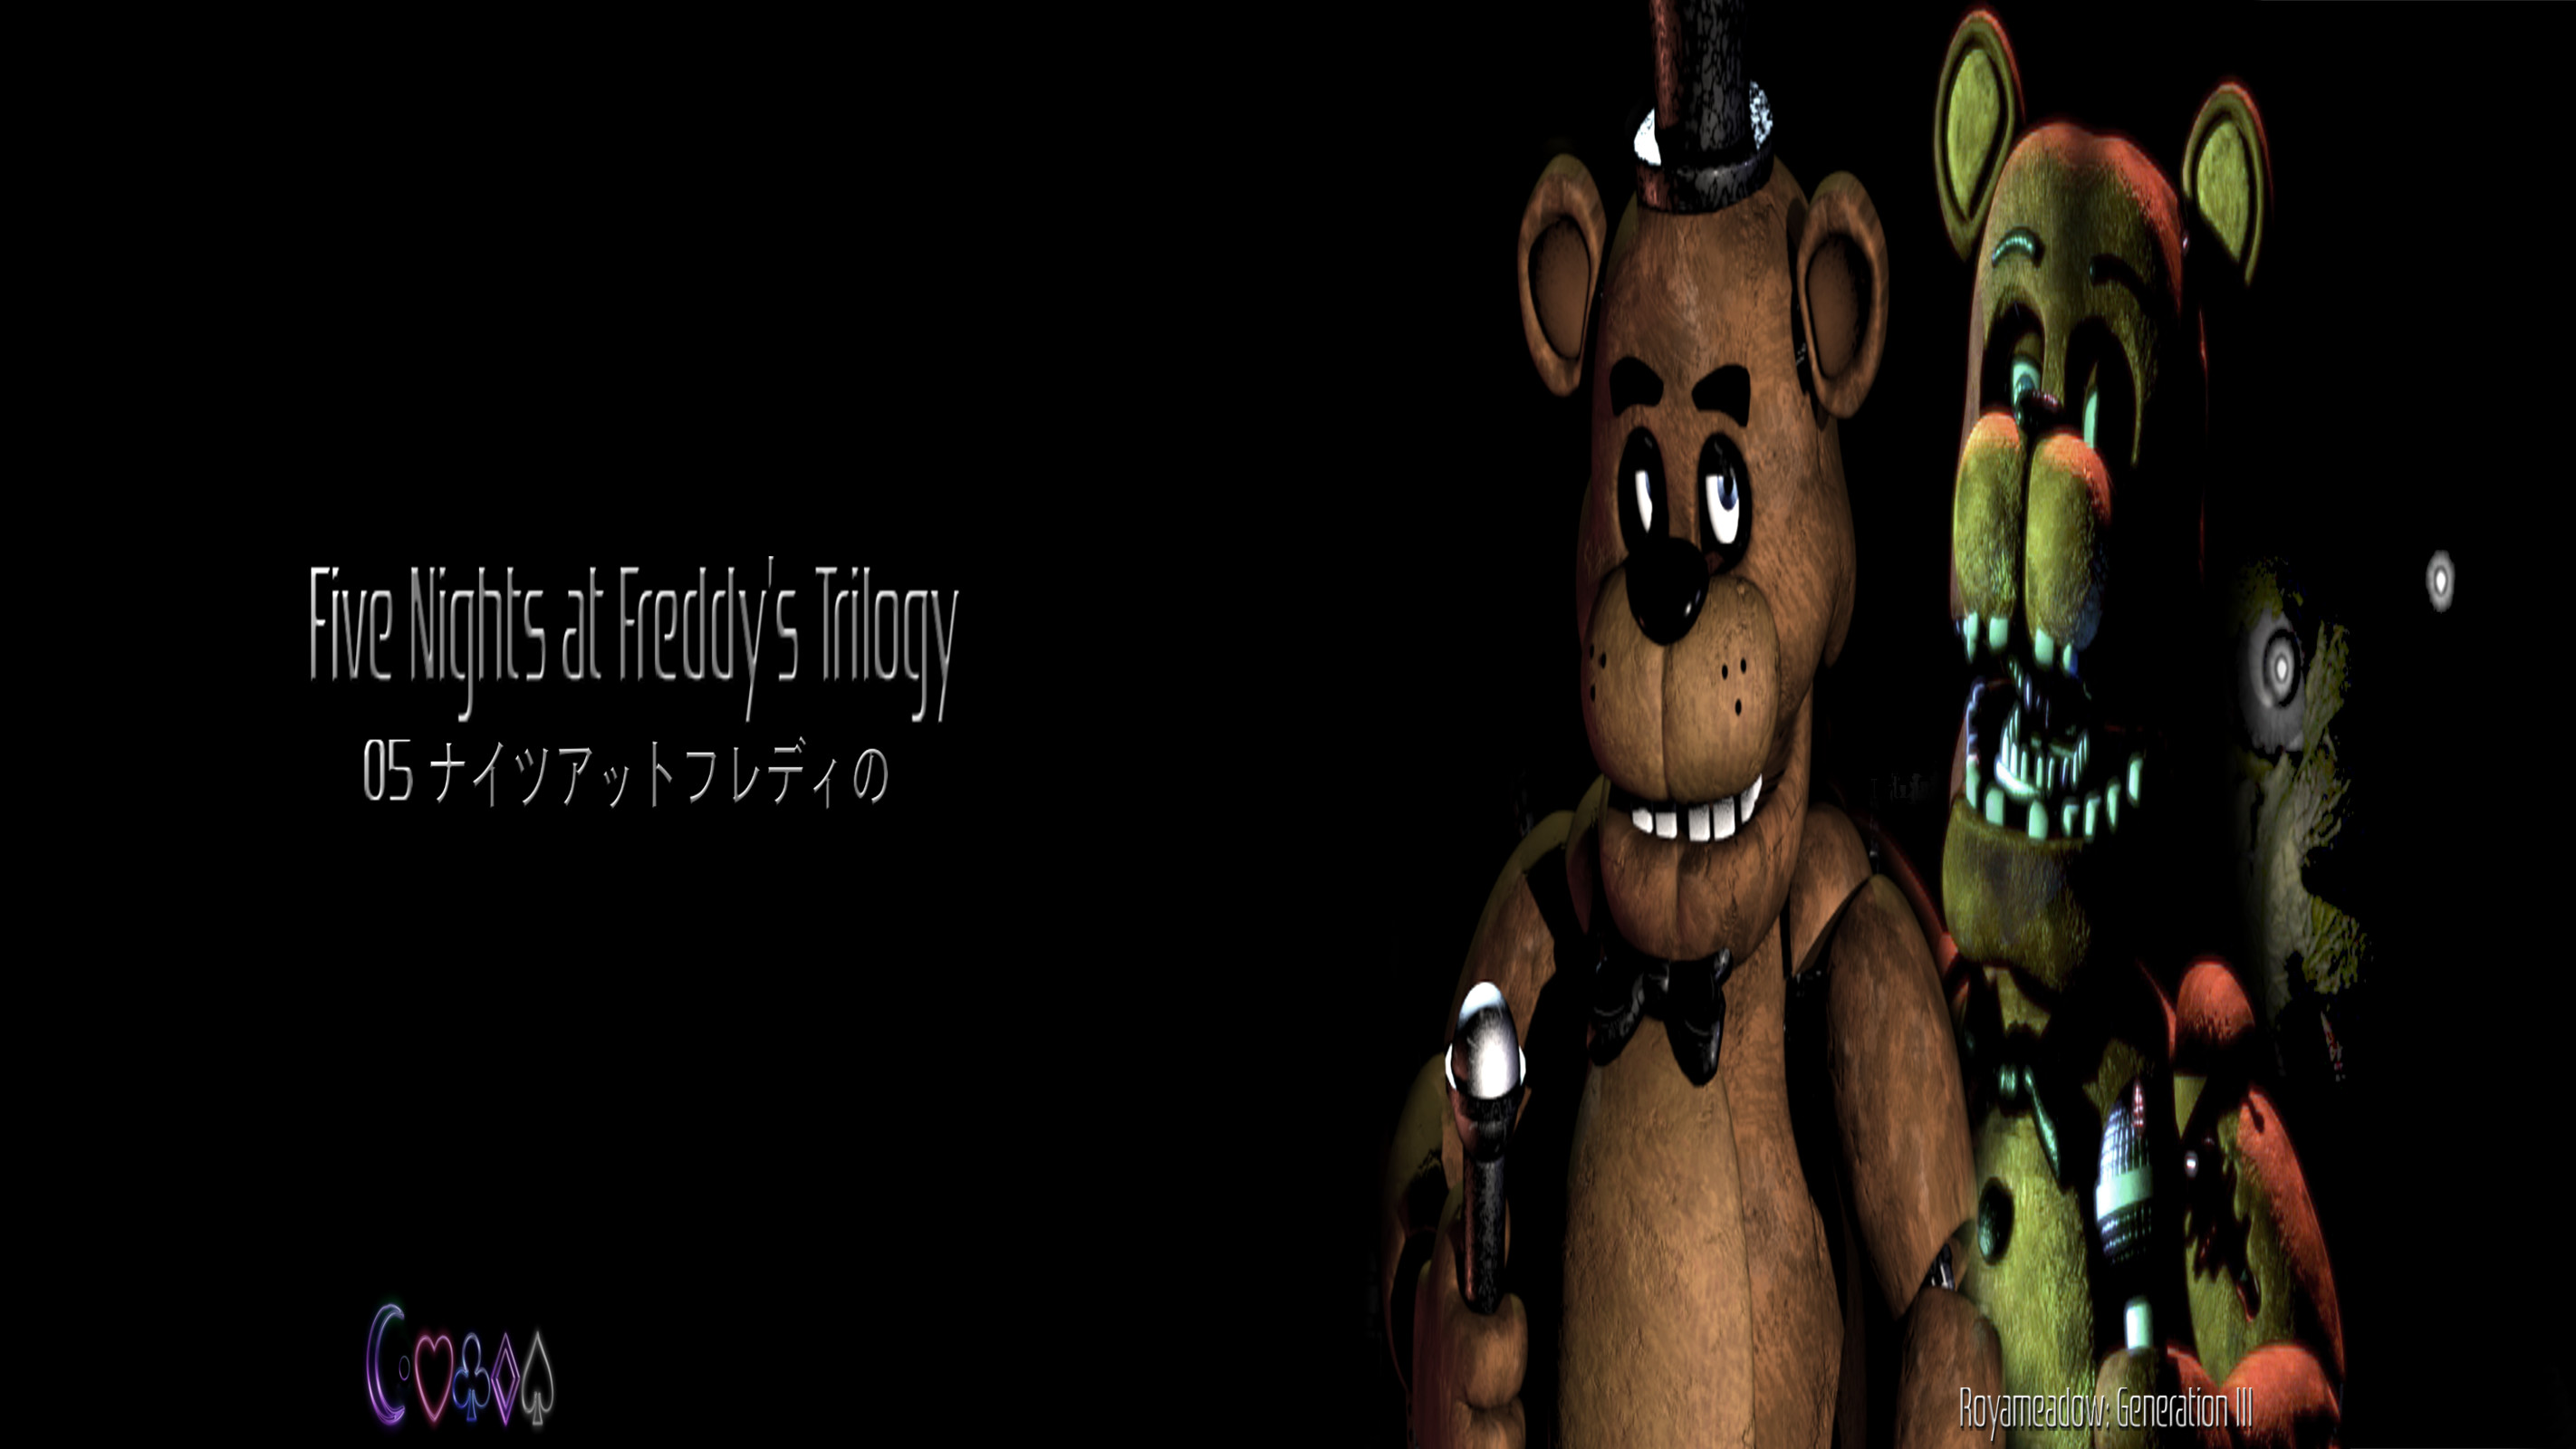 2844x1600 ... Five Nights at Freddy's Trilogy: Video Wallpaper by Royameadow